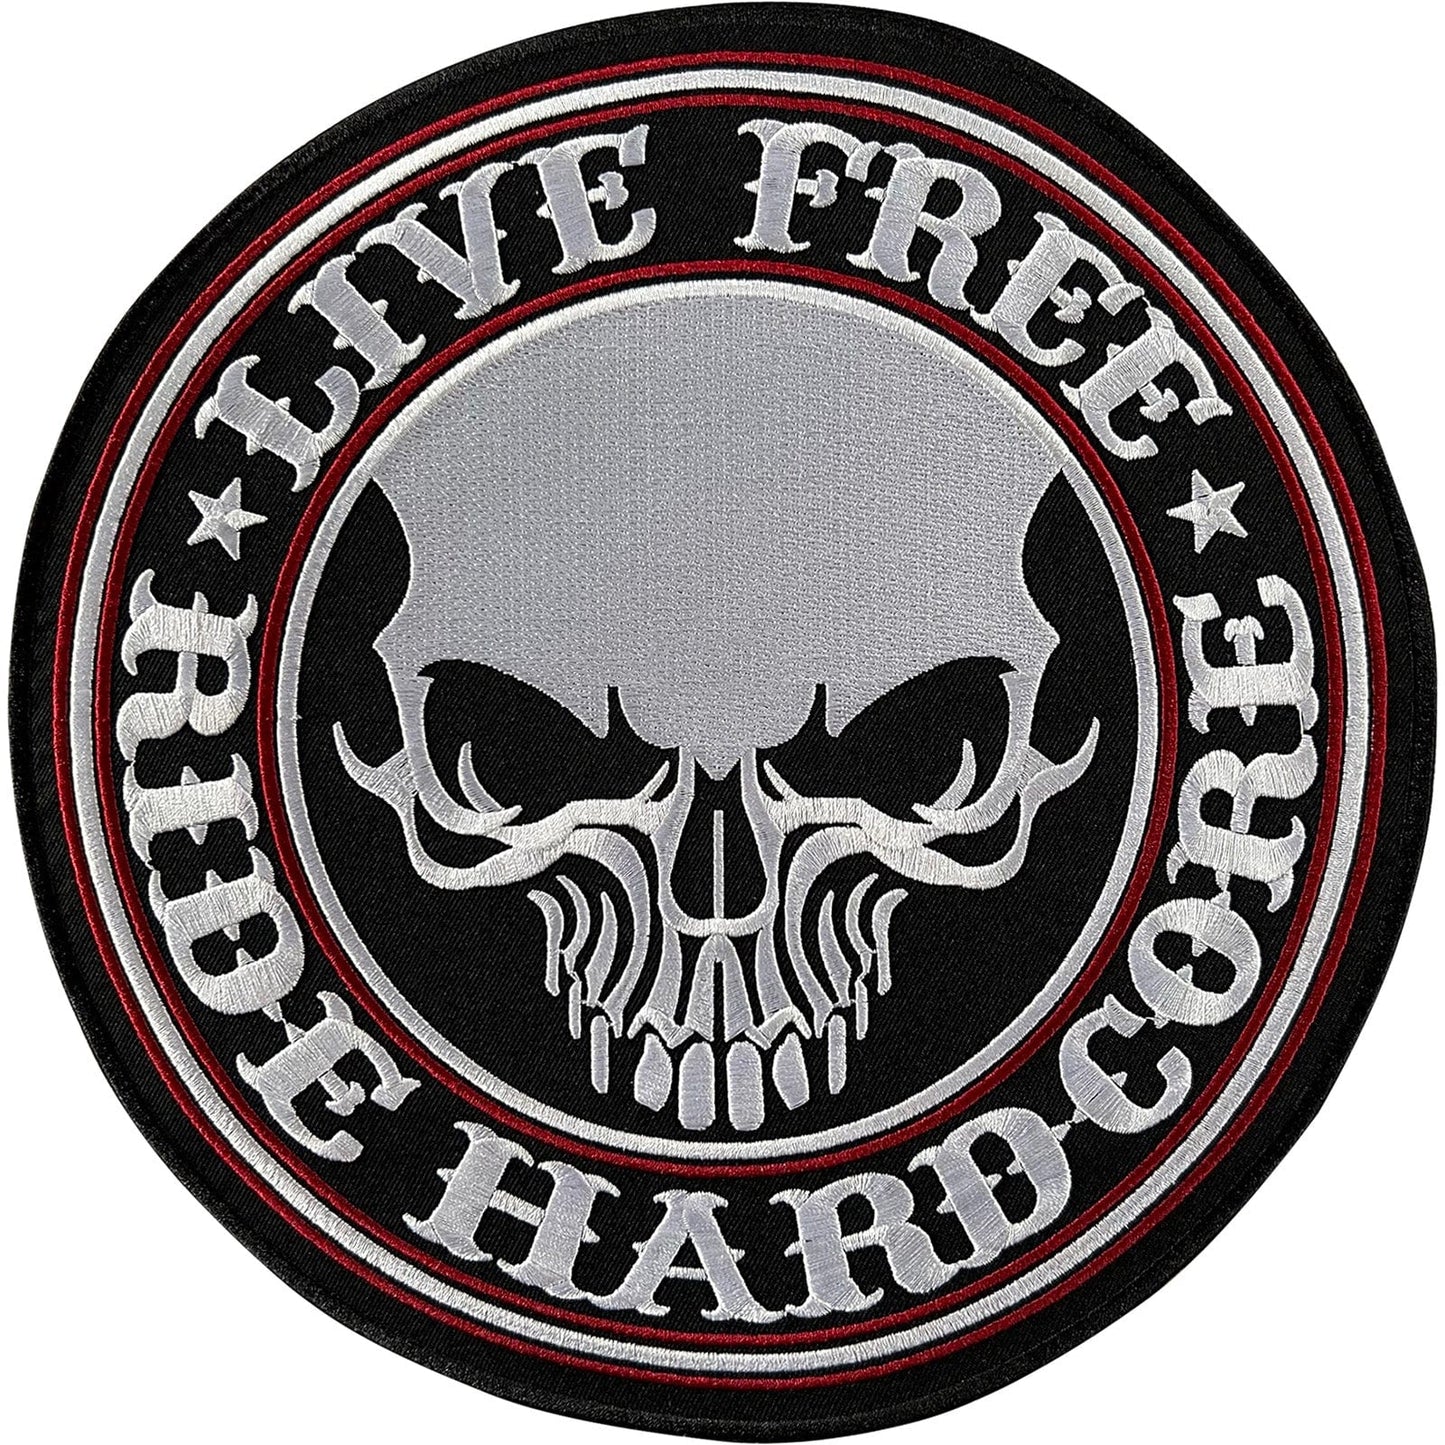 Large Live Free Ride Hardcore Embroidered Patch Iron Sew On Jacket Biker Badge